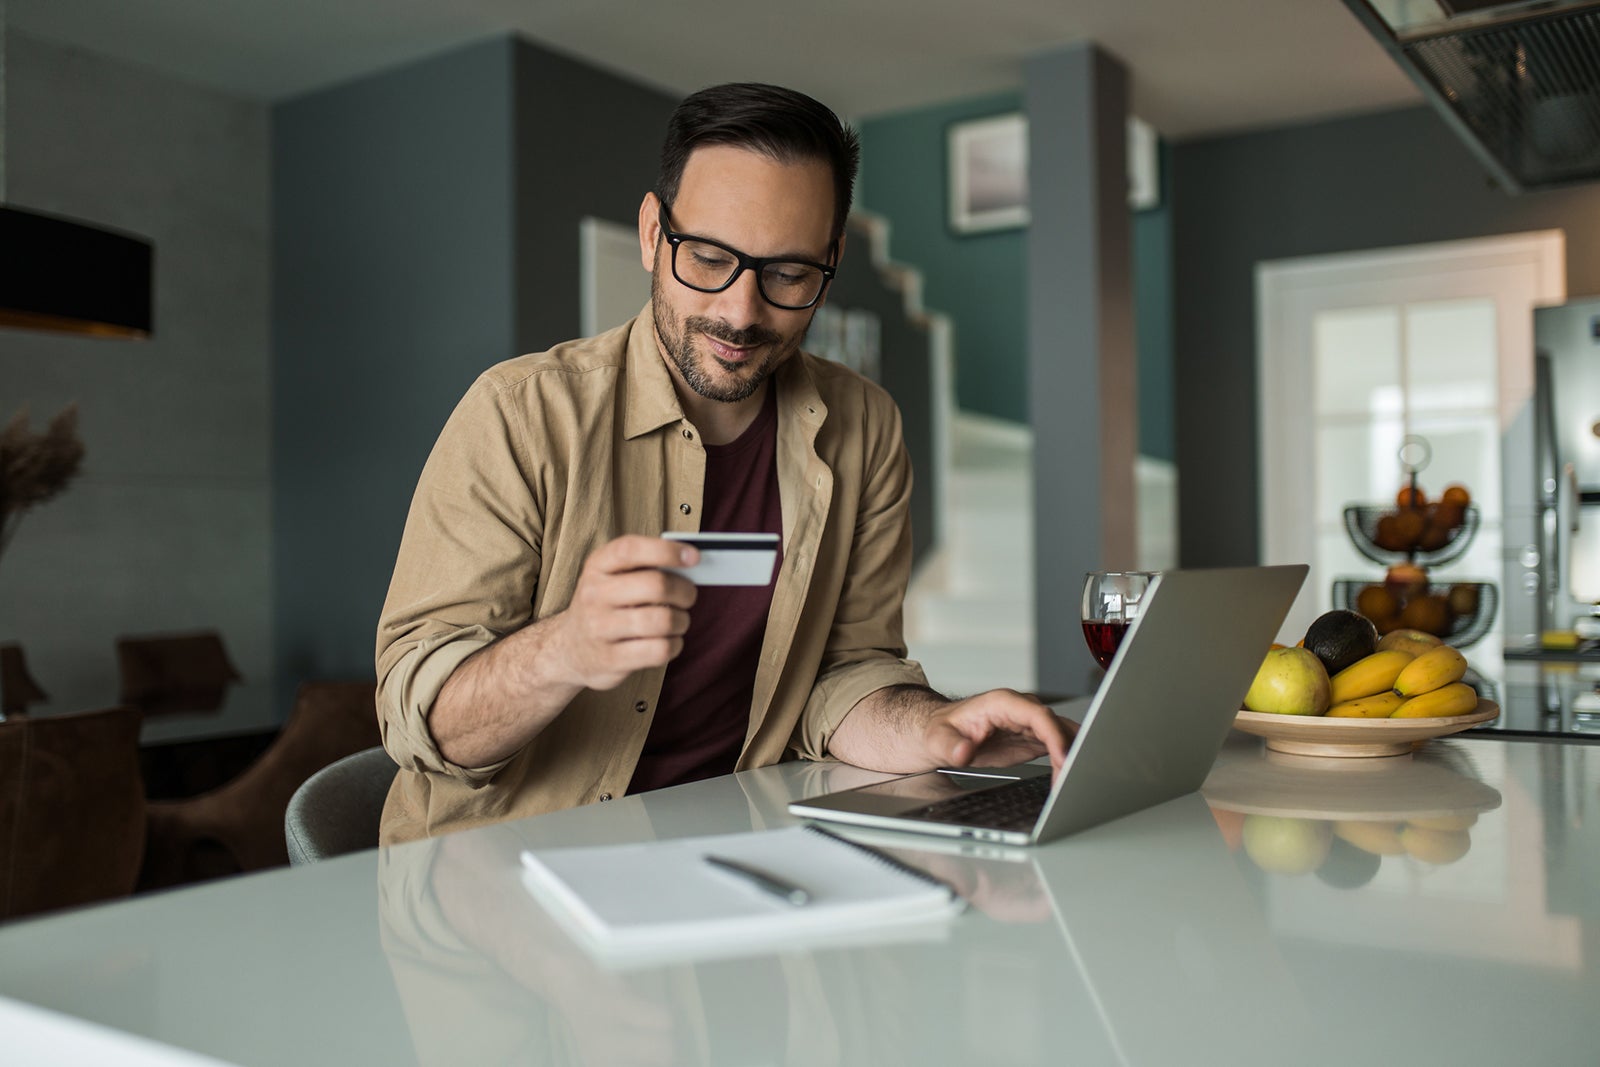 You are currently viewing Visa, Mastercard agree to lower swipe fees by 20% — how will this impact your rewards?